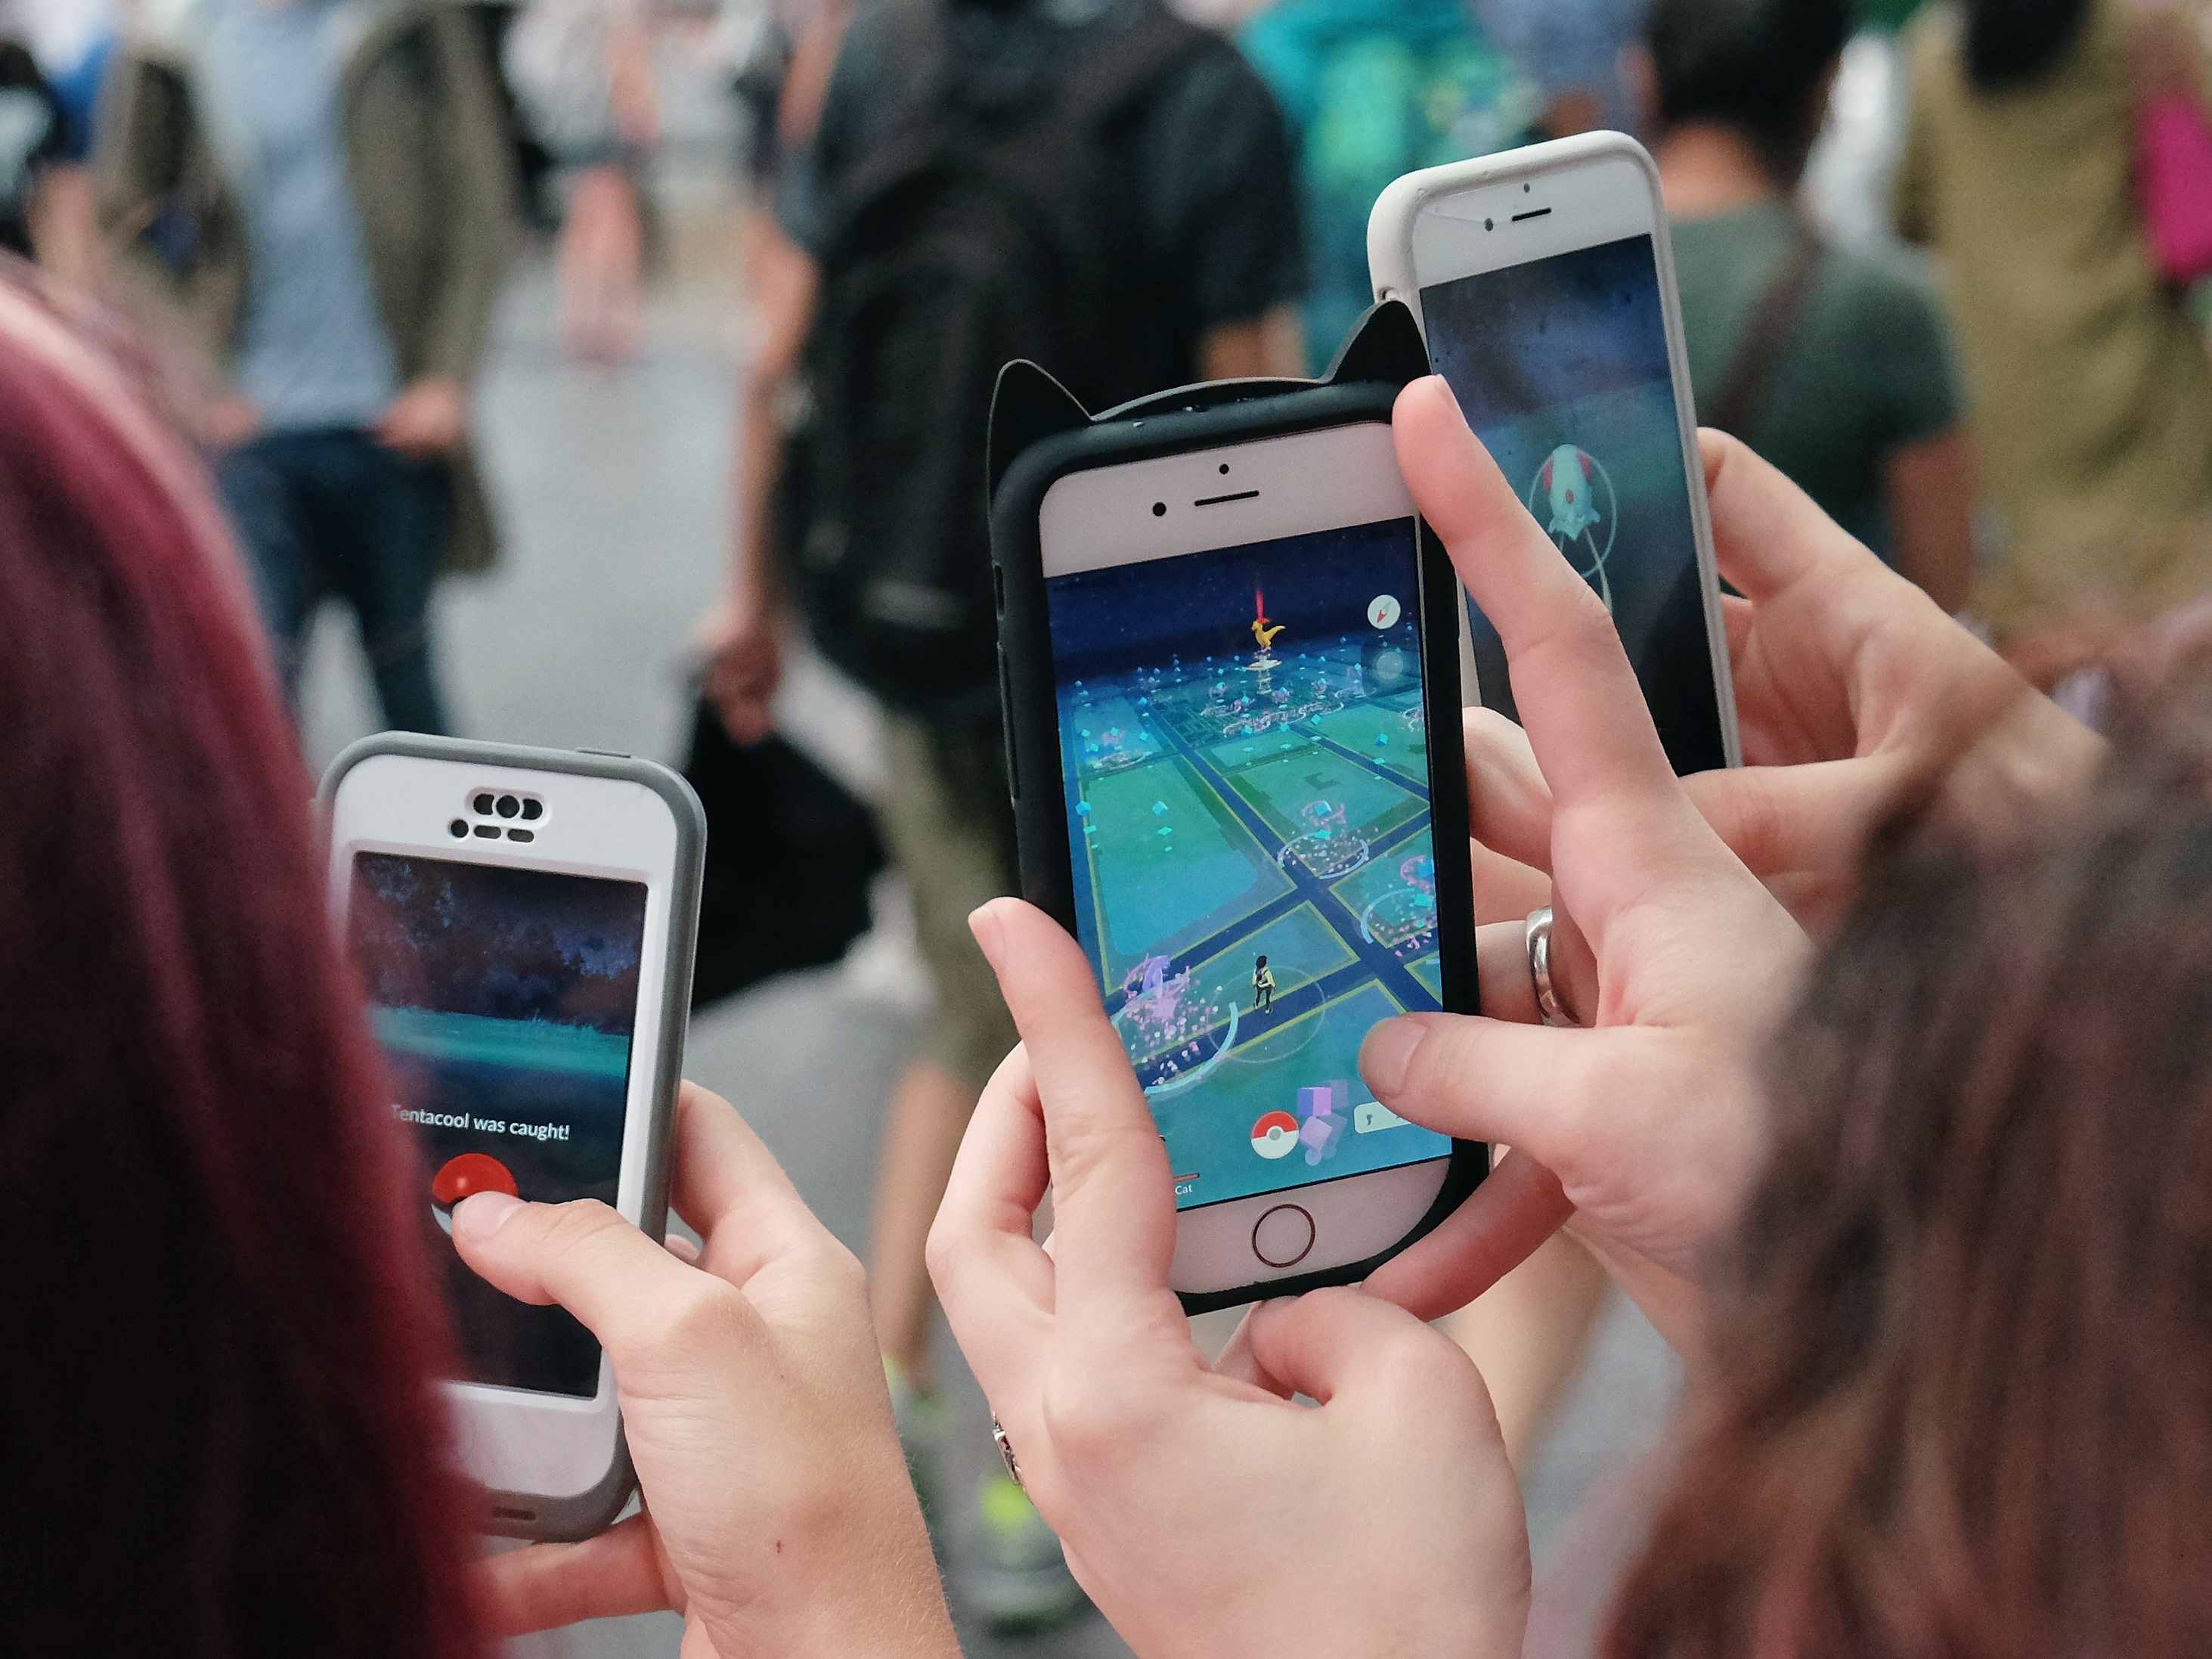 People play Pokémon Go in New York City on July 25. The New York governor's ban on playing the game will apply to nearly 3,000 sex offenders currently on parole. Mike Coppola/Getty Images